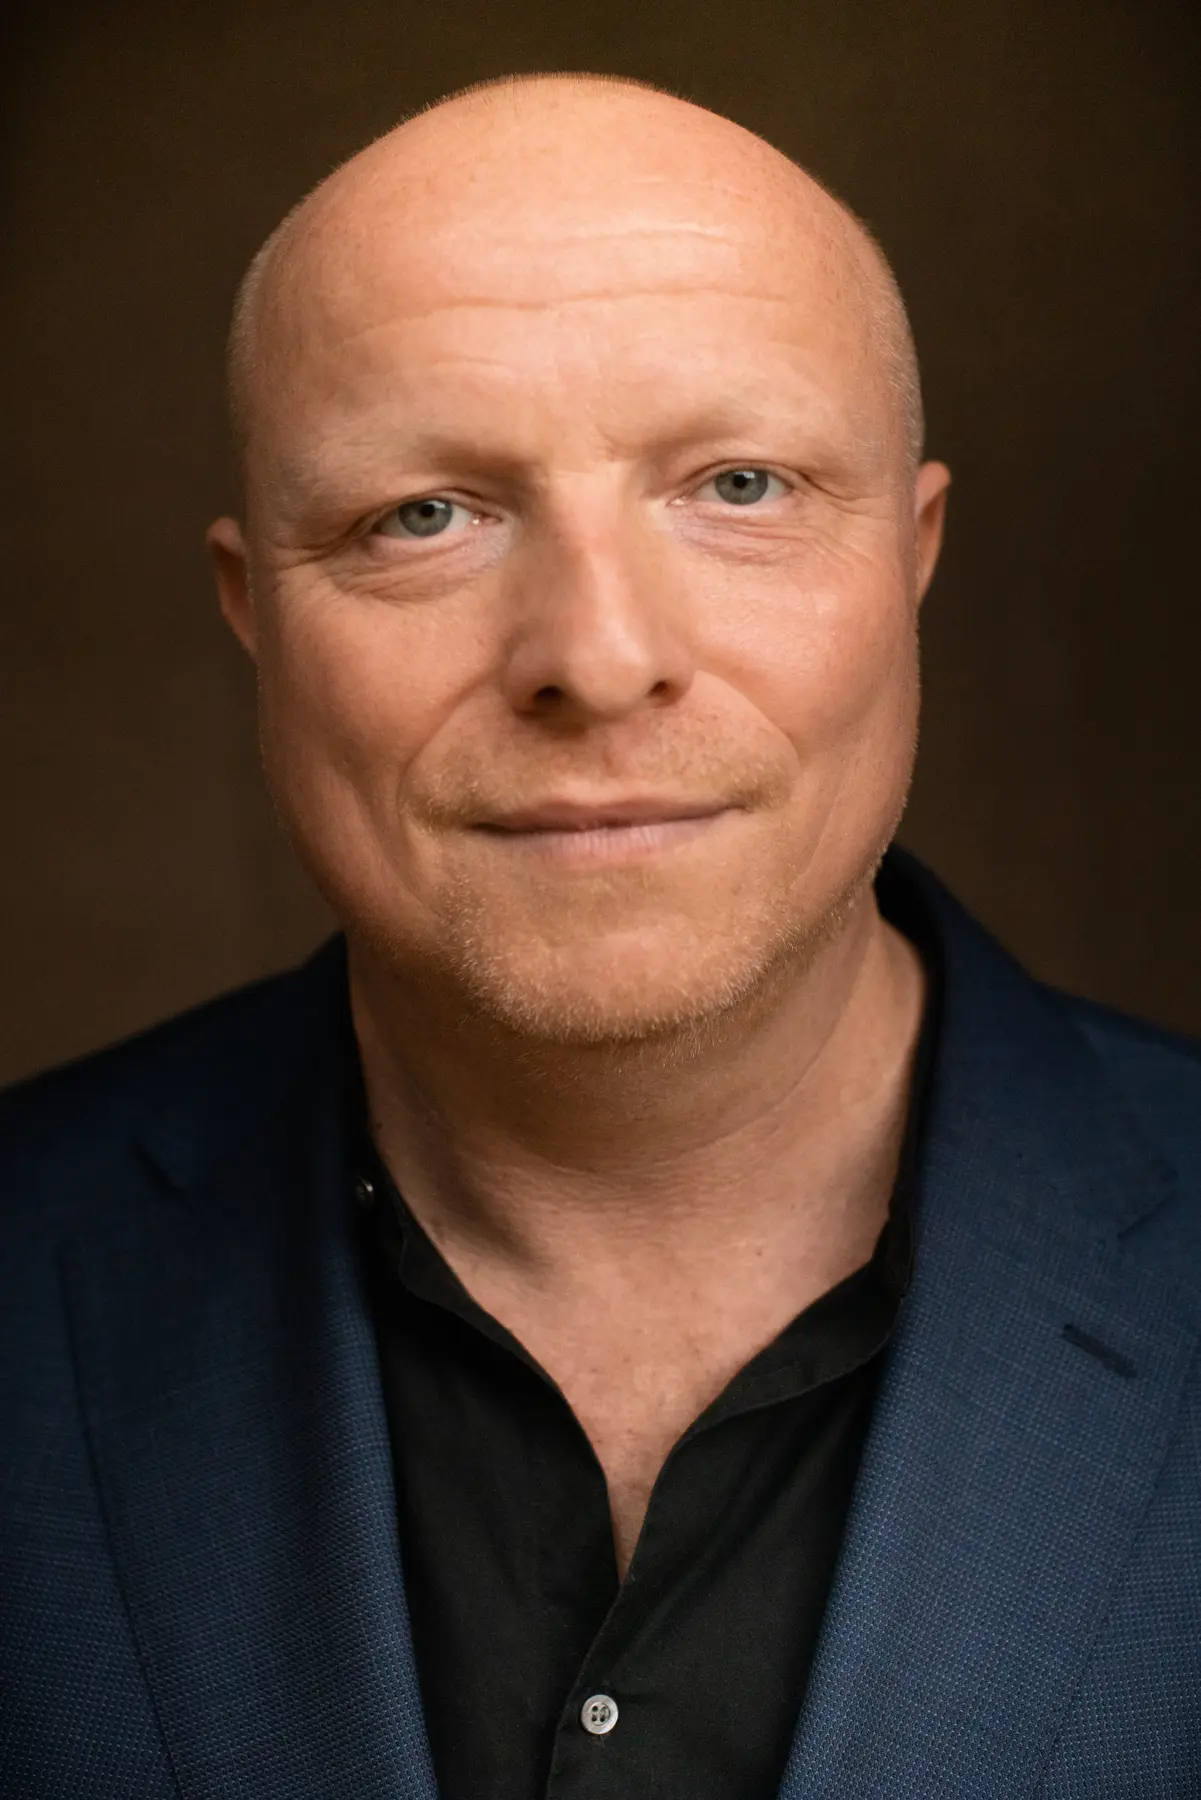 Photo portrait of Holger Schulze from the front looking straight into the camera with a black shirt and blue blazer.